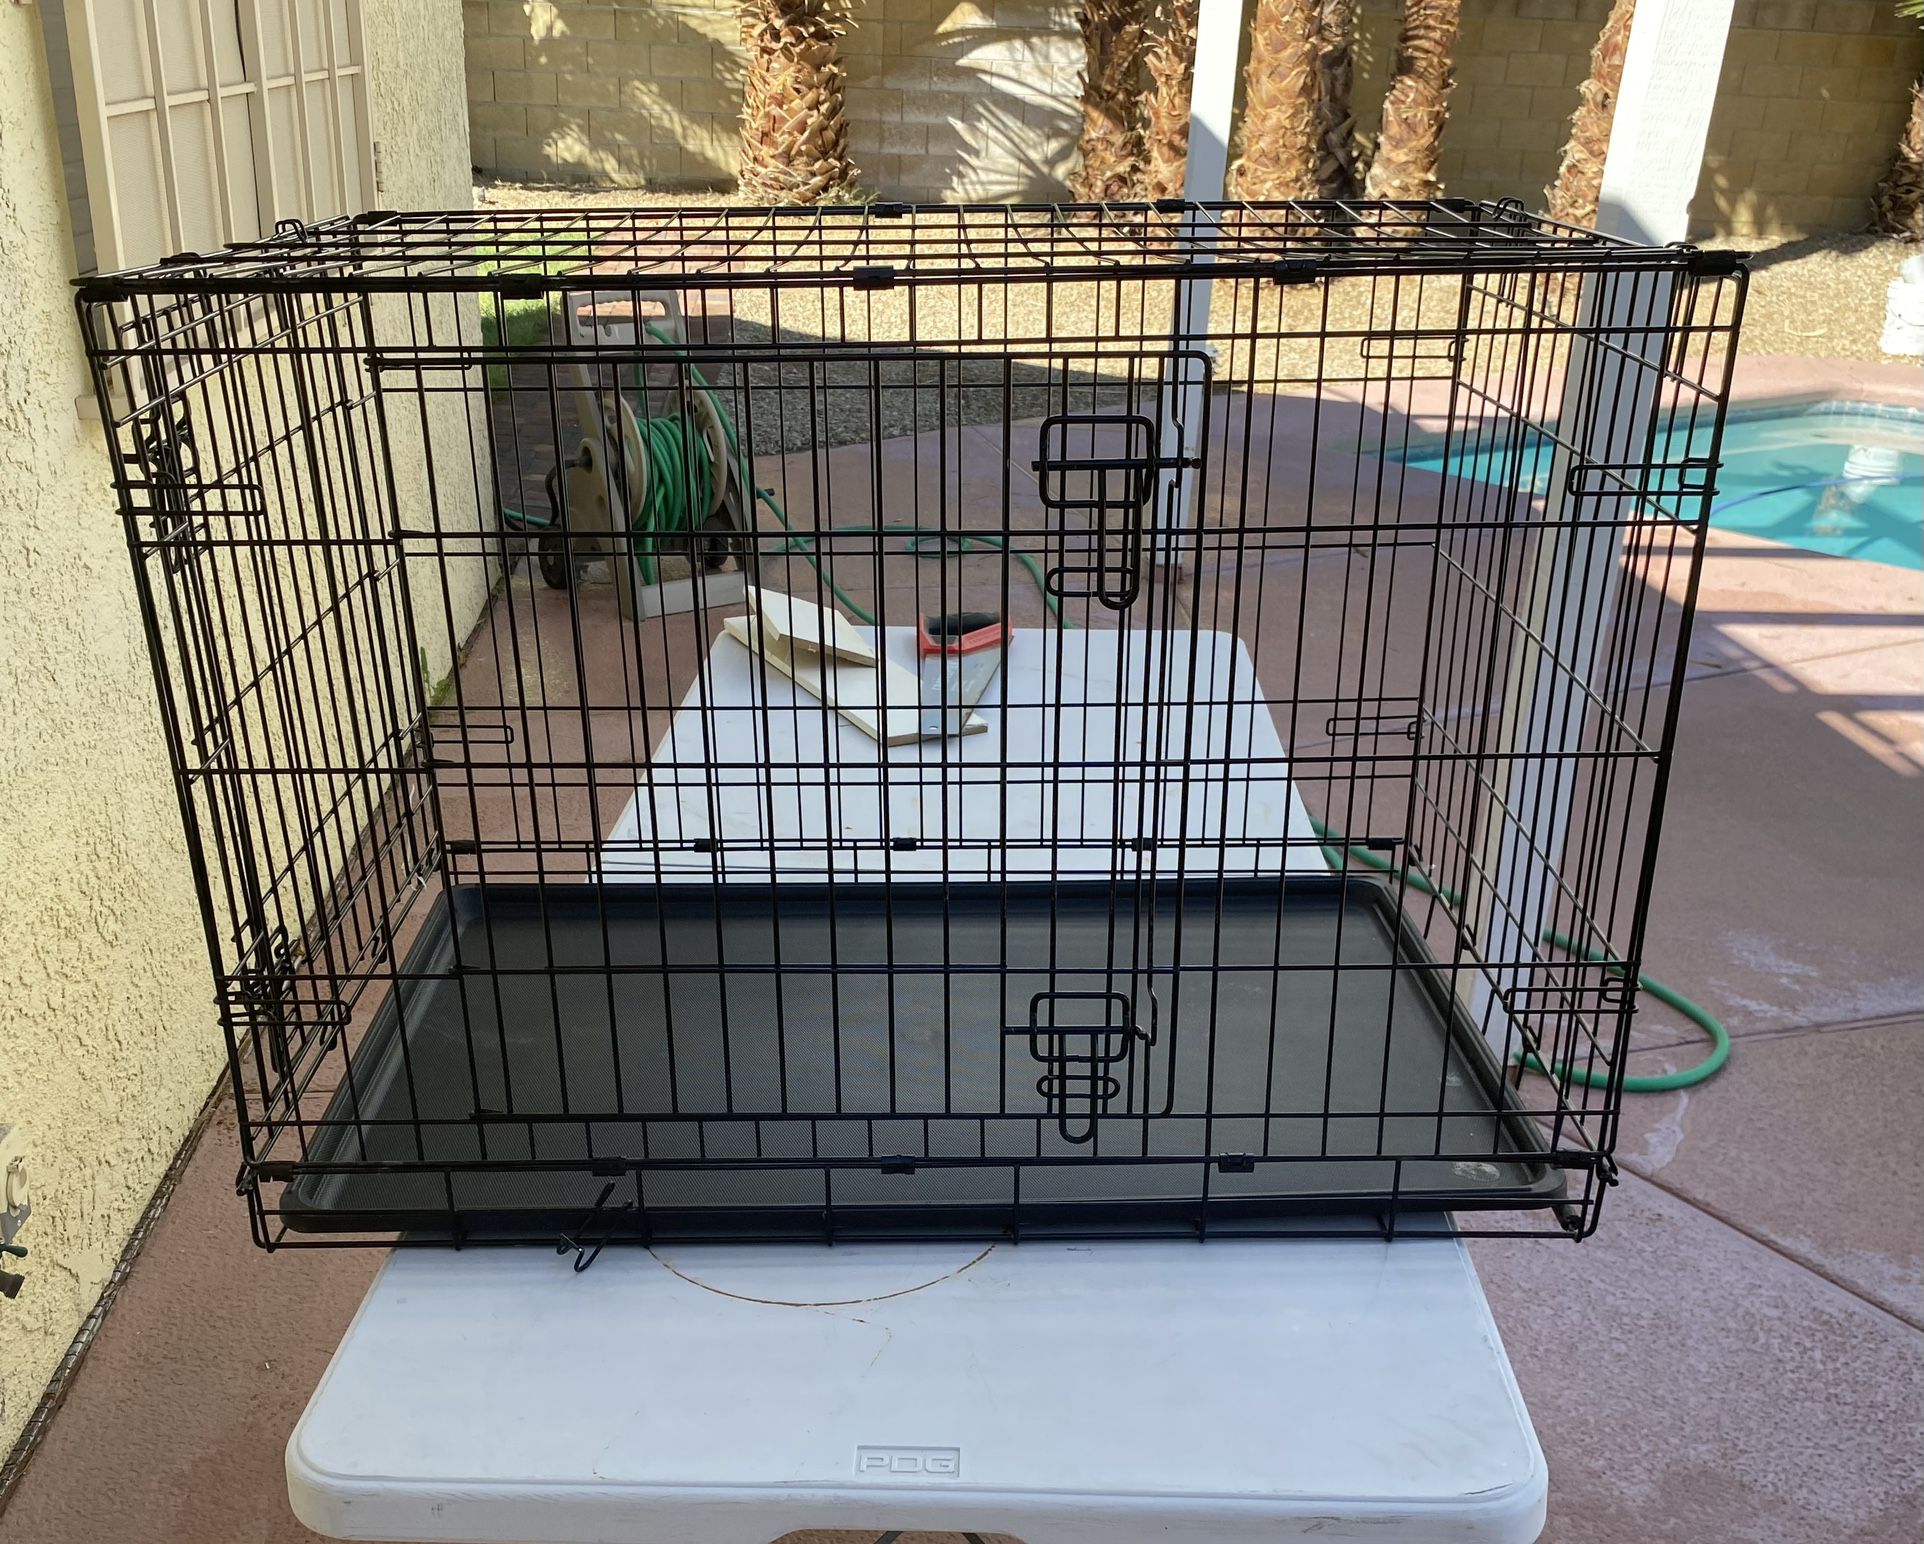 3 DOG KENNELS EXCELLENT CONDITION SELLING ALL 3 KENNELS FOR $180 TAKE ALL ! XL IN SIZE MEASUREMENTS WITH PHOTOS. IF YOU WANT JUST 1 $70 ! THANK YOU ! 